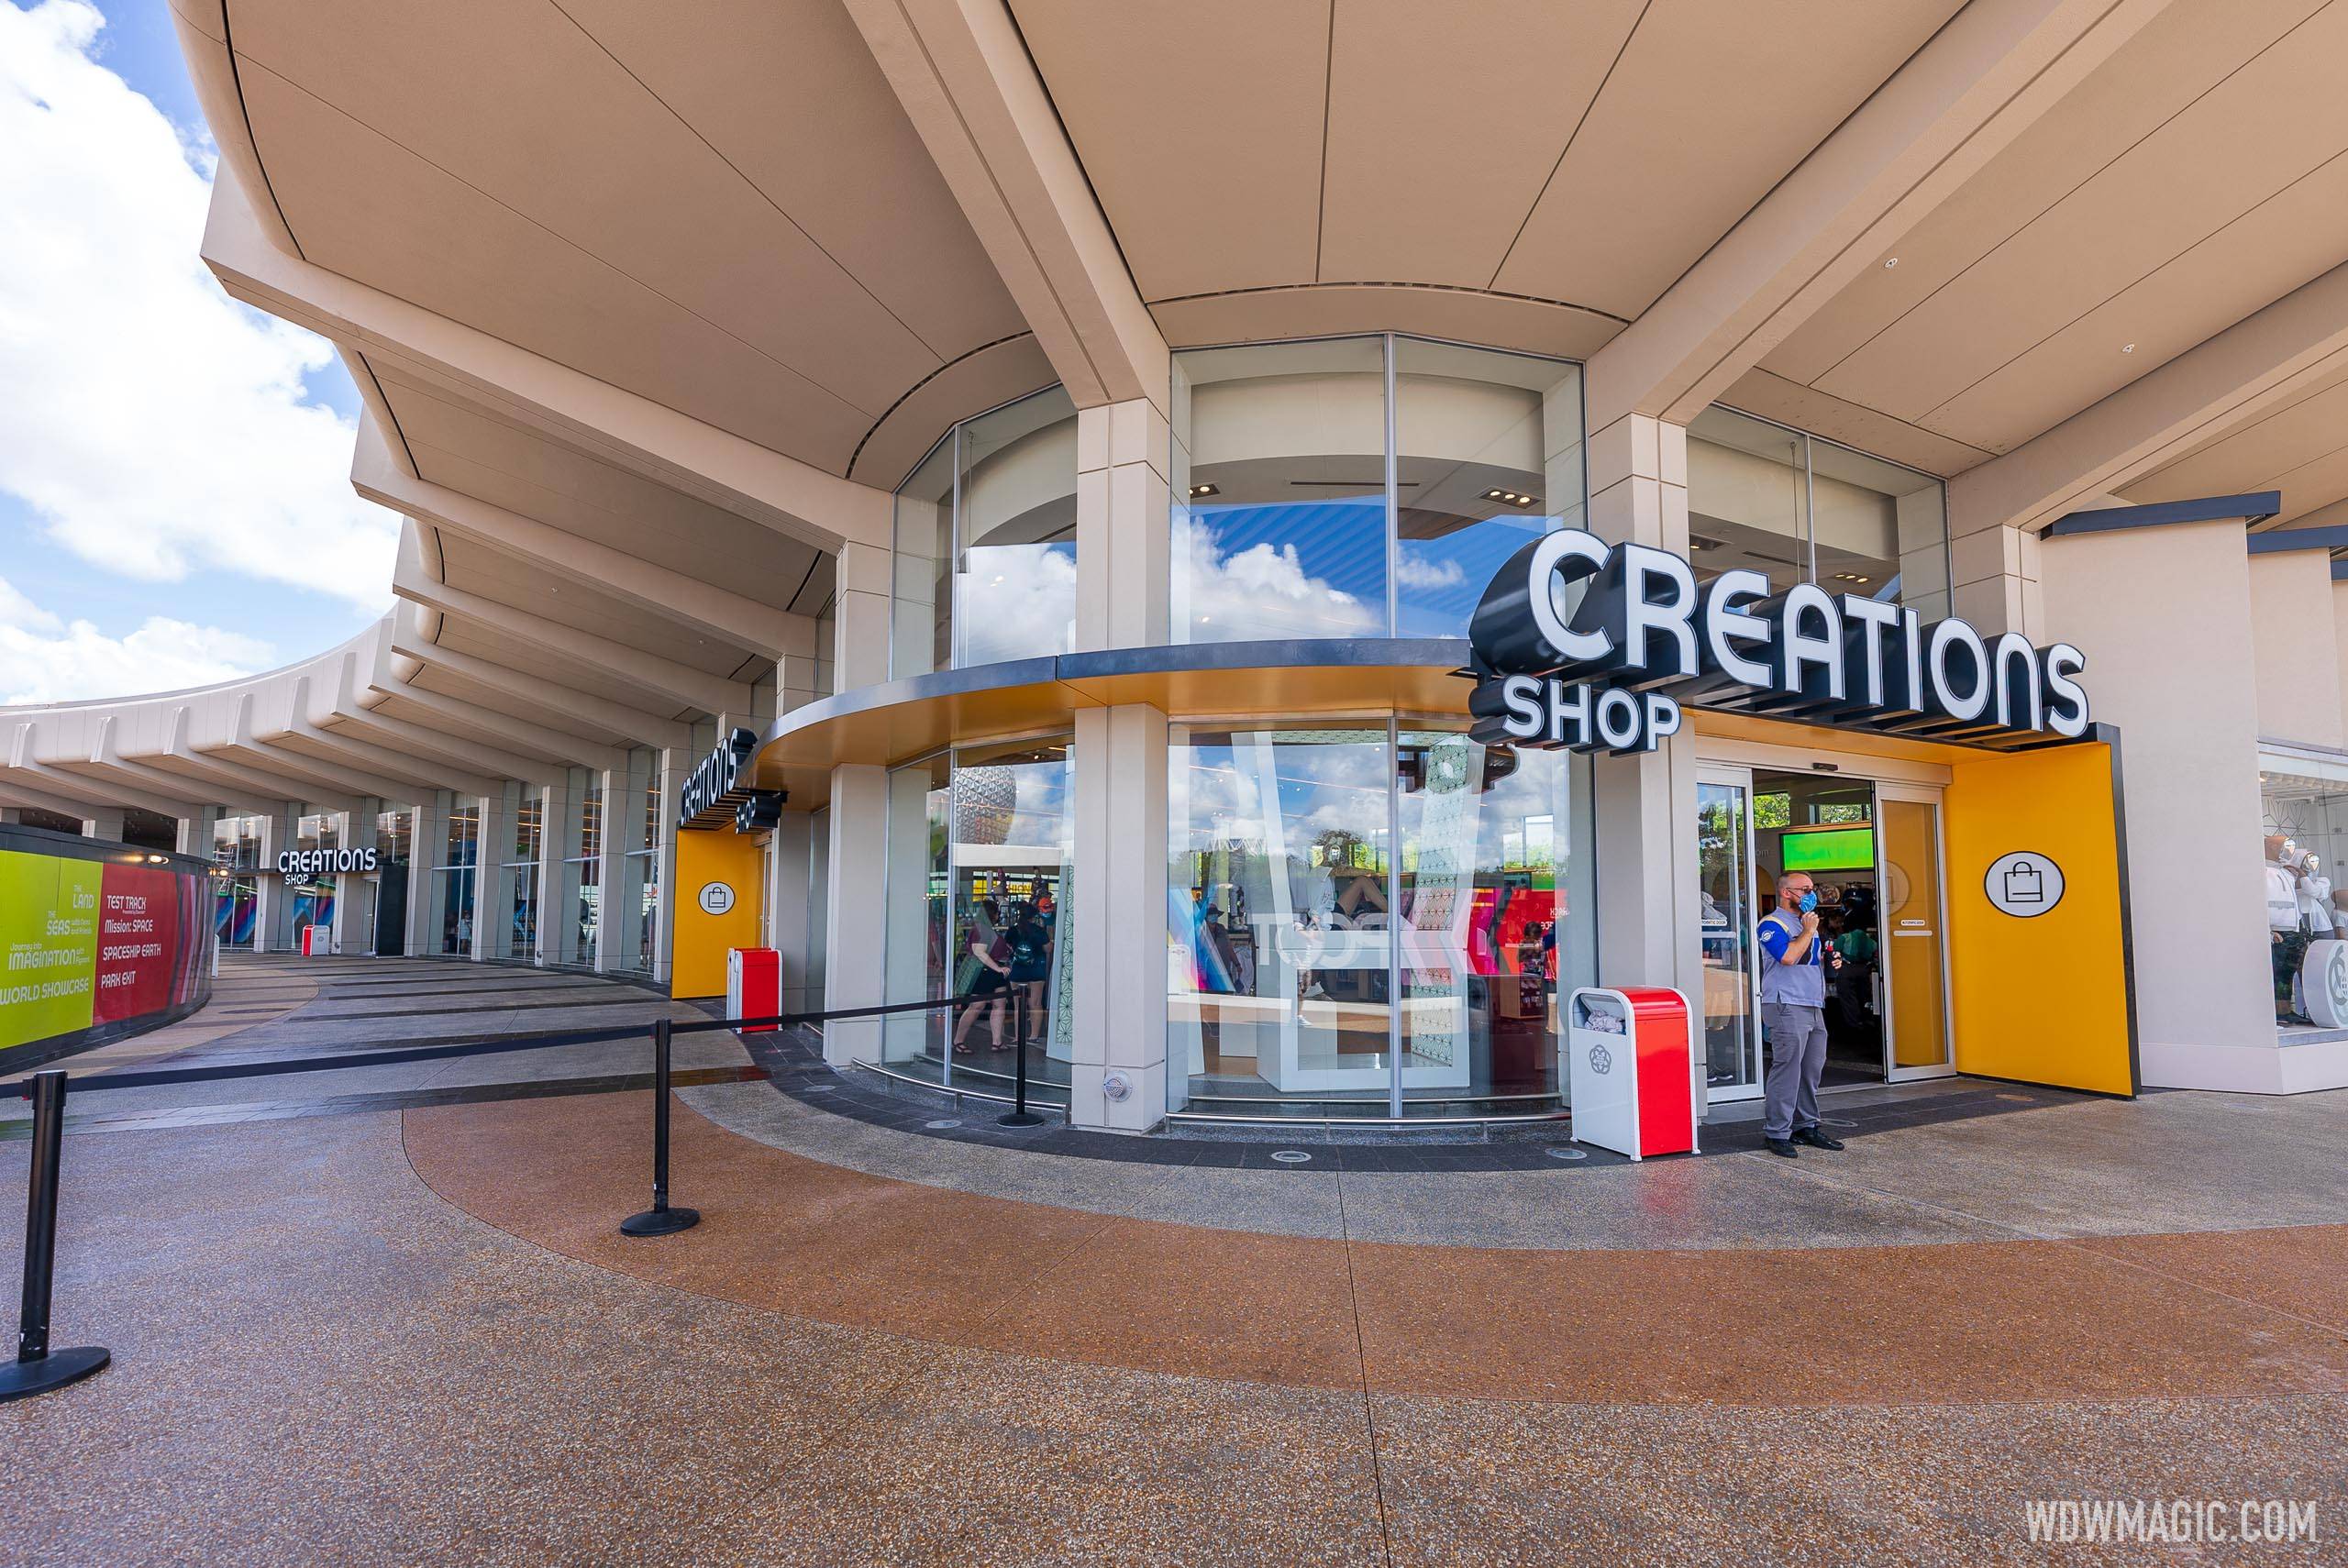 Opening Day at Creations Shop